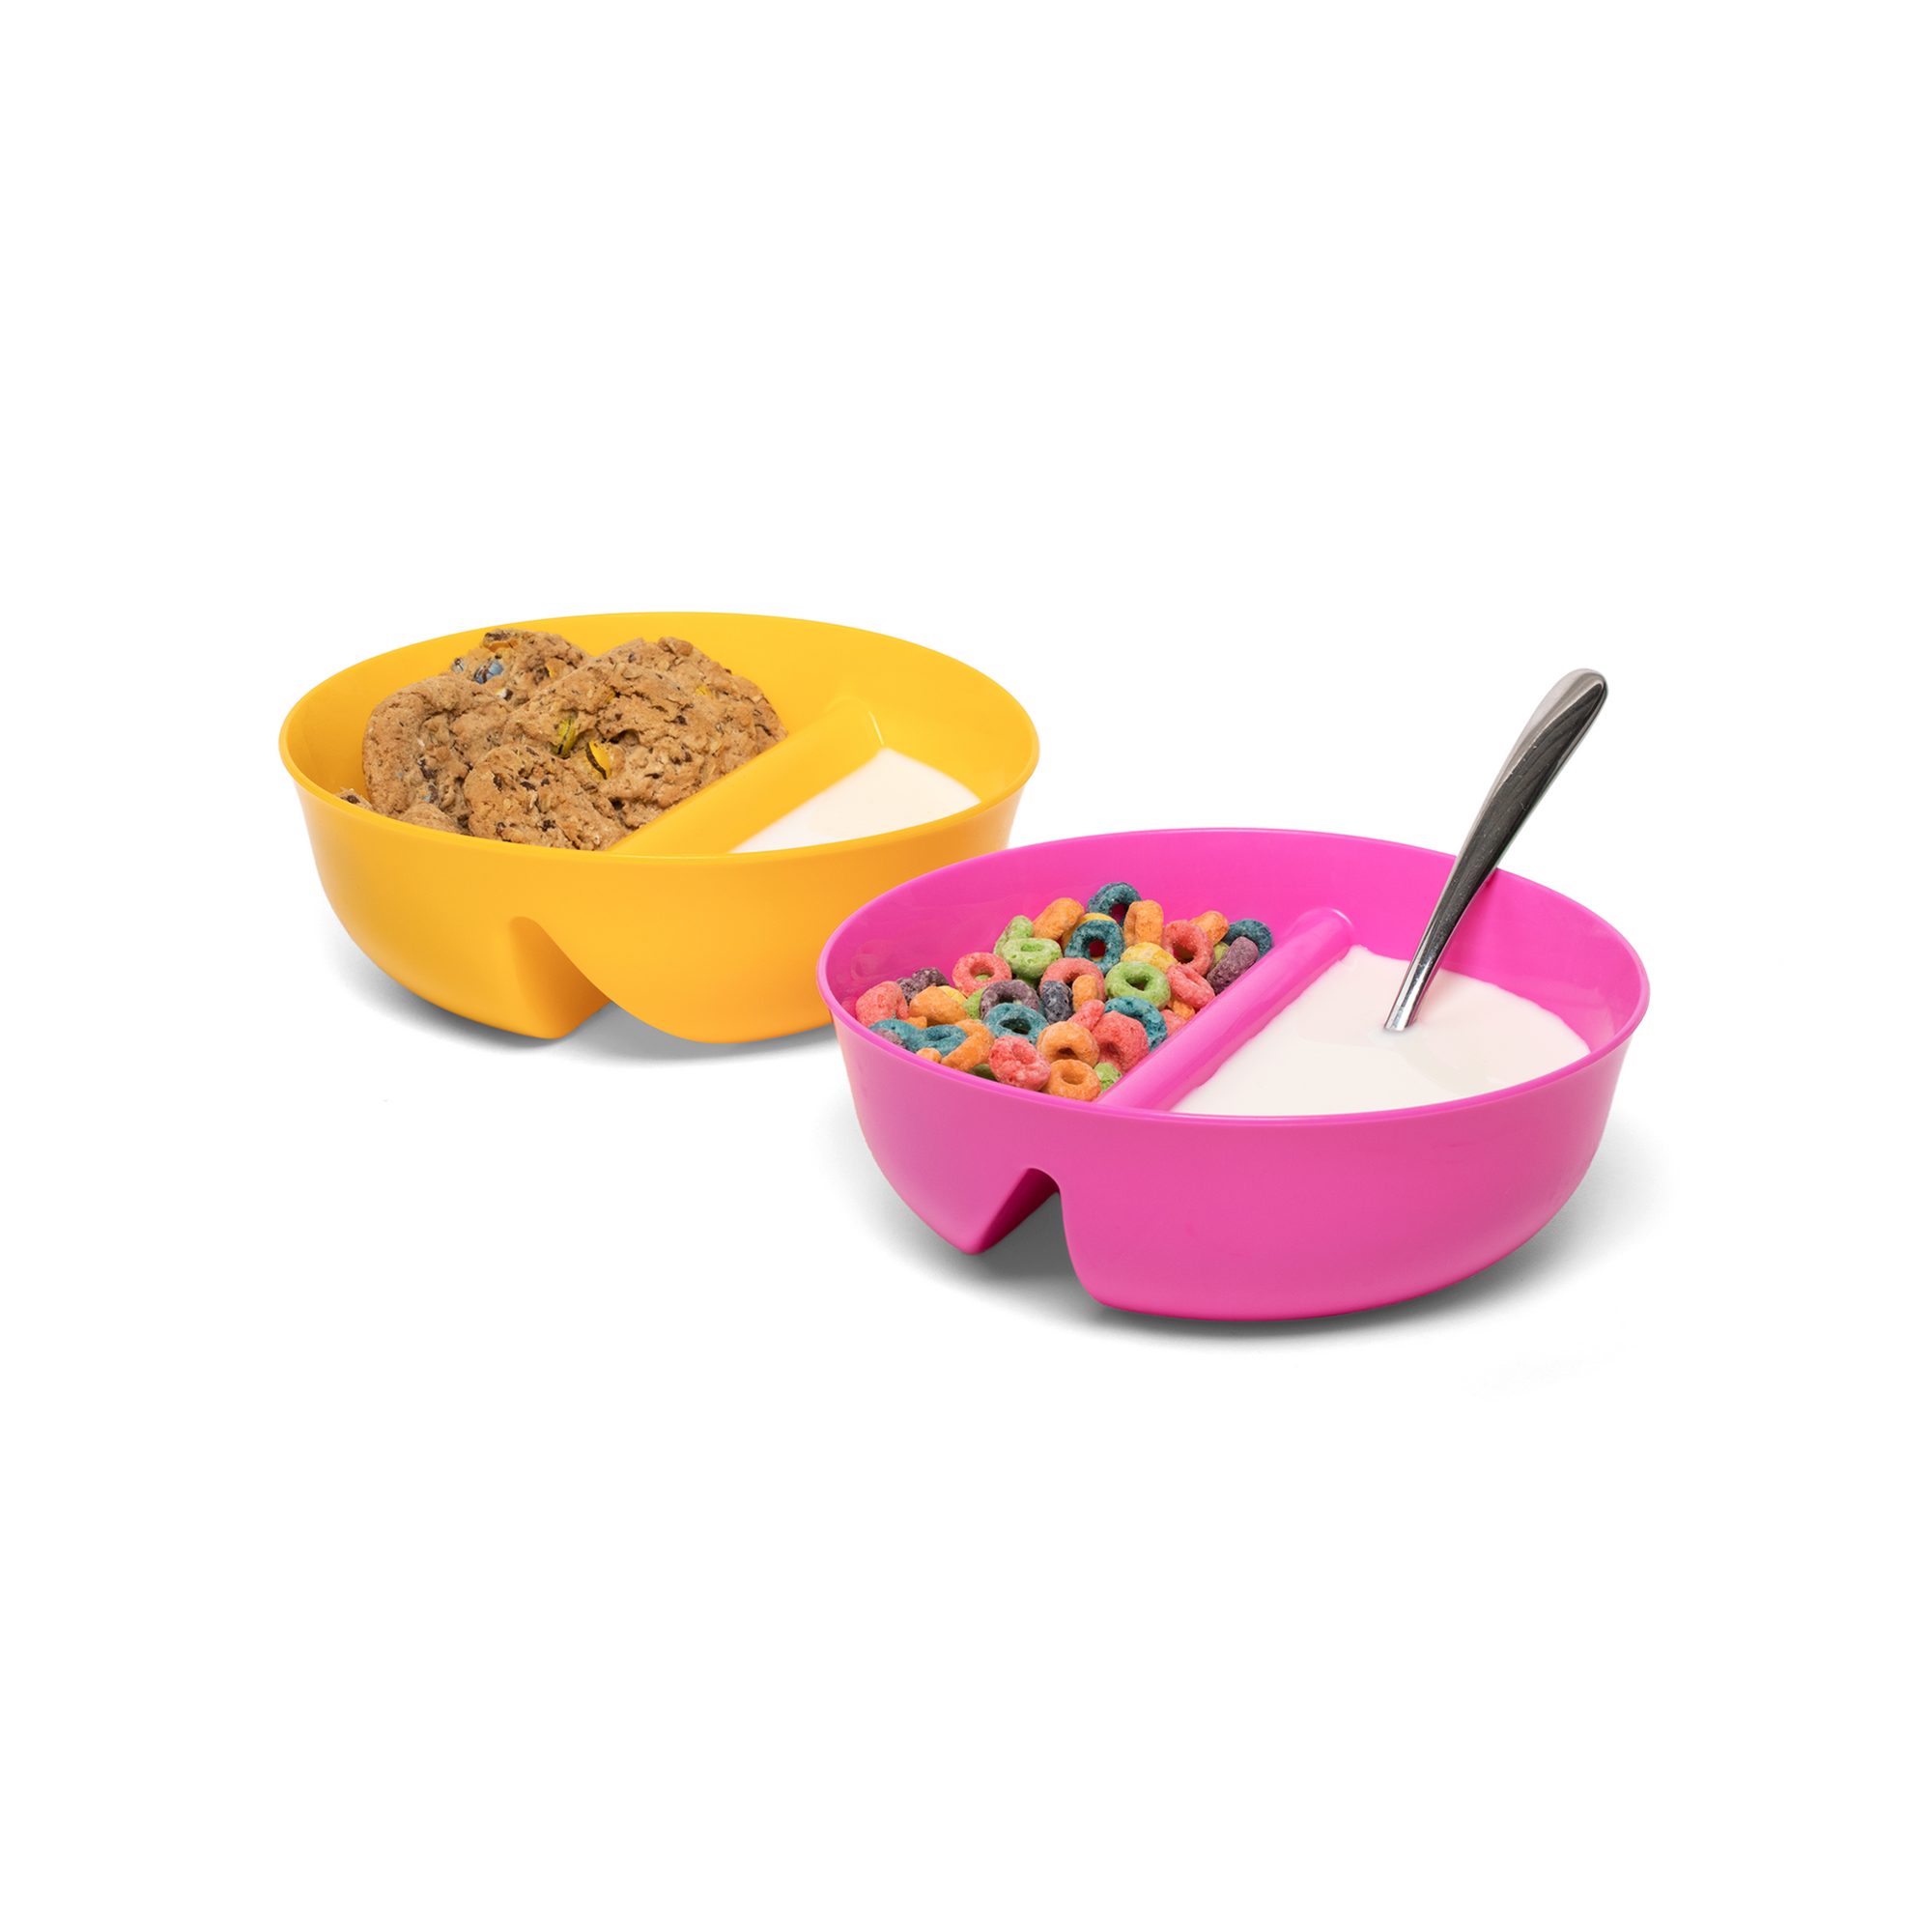 Bobasndm Cereal Cup to Go Mug,680 ml Double Layer Cereal Cup with